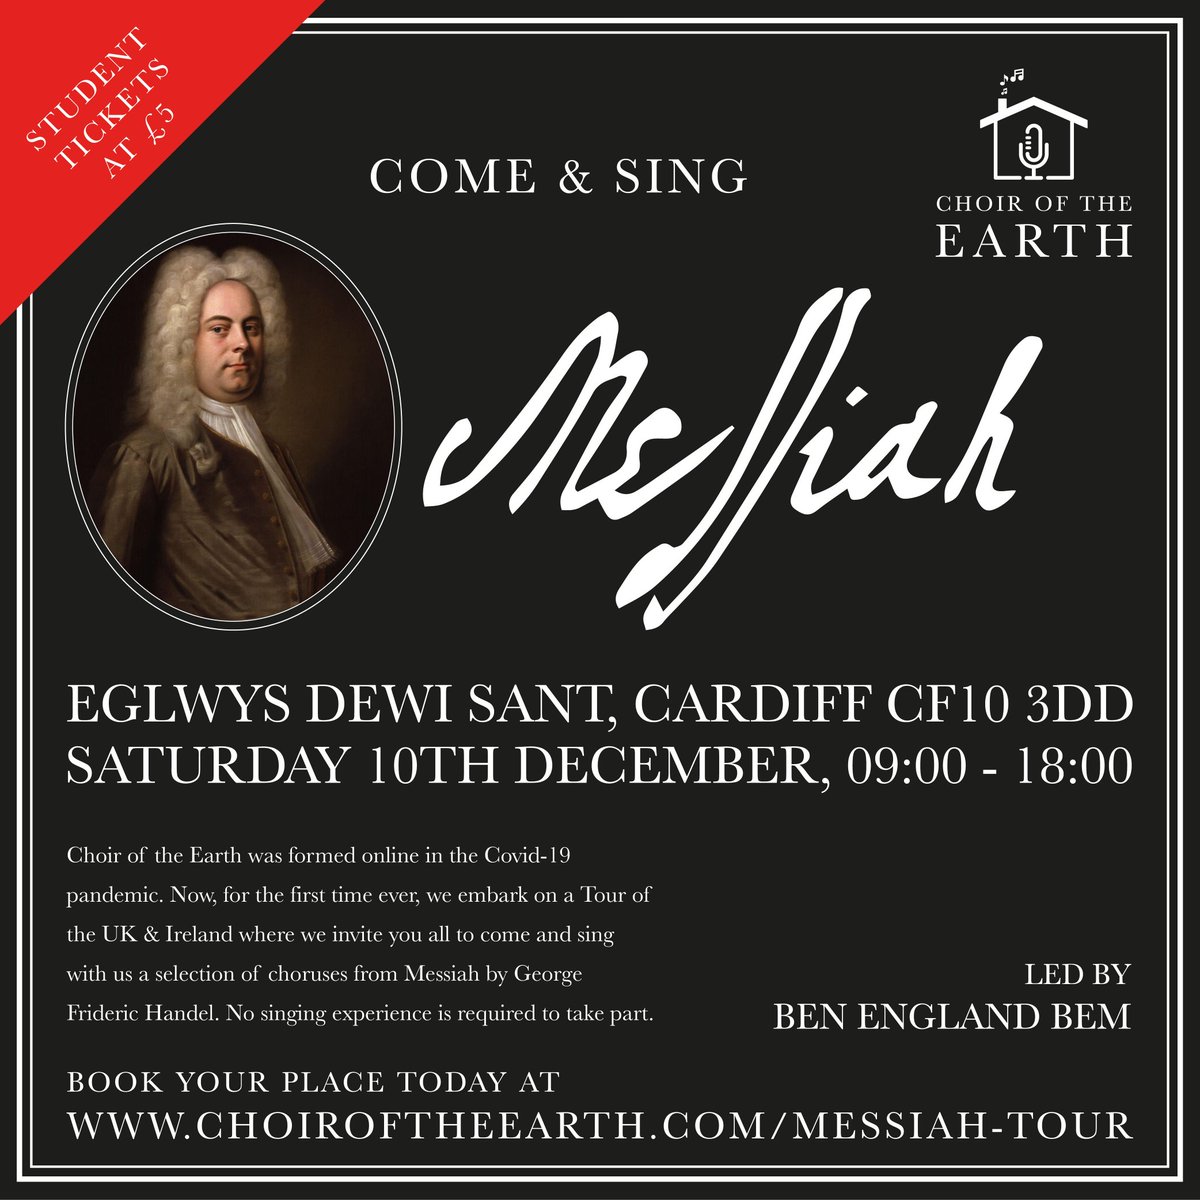 One week to go until our next #MessiahTour event in #Cardiff! Are you joining us? As well as our usual #ComeAndSing choruses, we're very excited to offer everyone the unique opportunity to learn, sing and record 'Hallelujah' in Welsh! Read more & BOOK NOW: choiroftheearth.com/messiah-tour